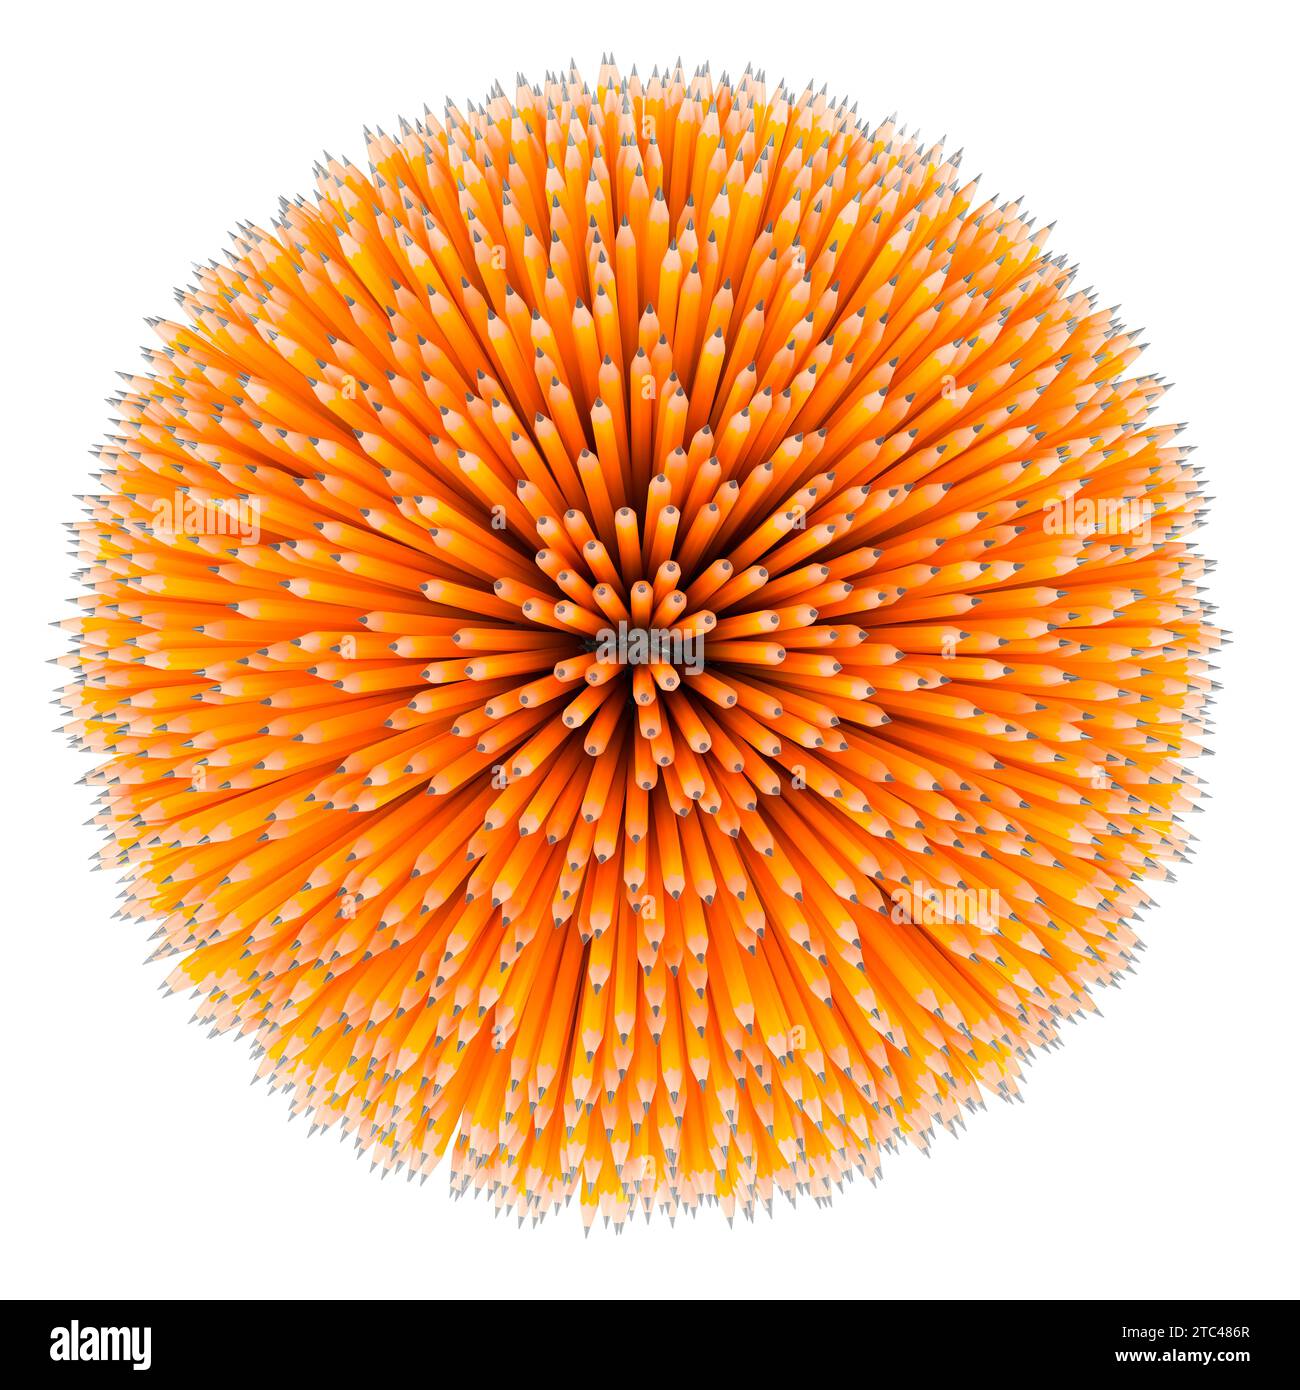 Sphere from pencils, 3D rendering isolated on white background Stock Photo